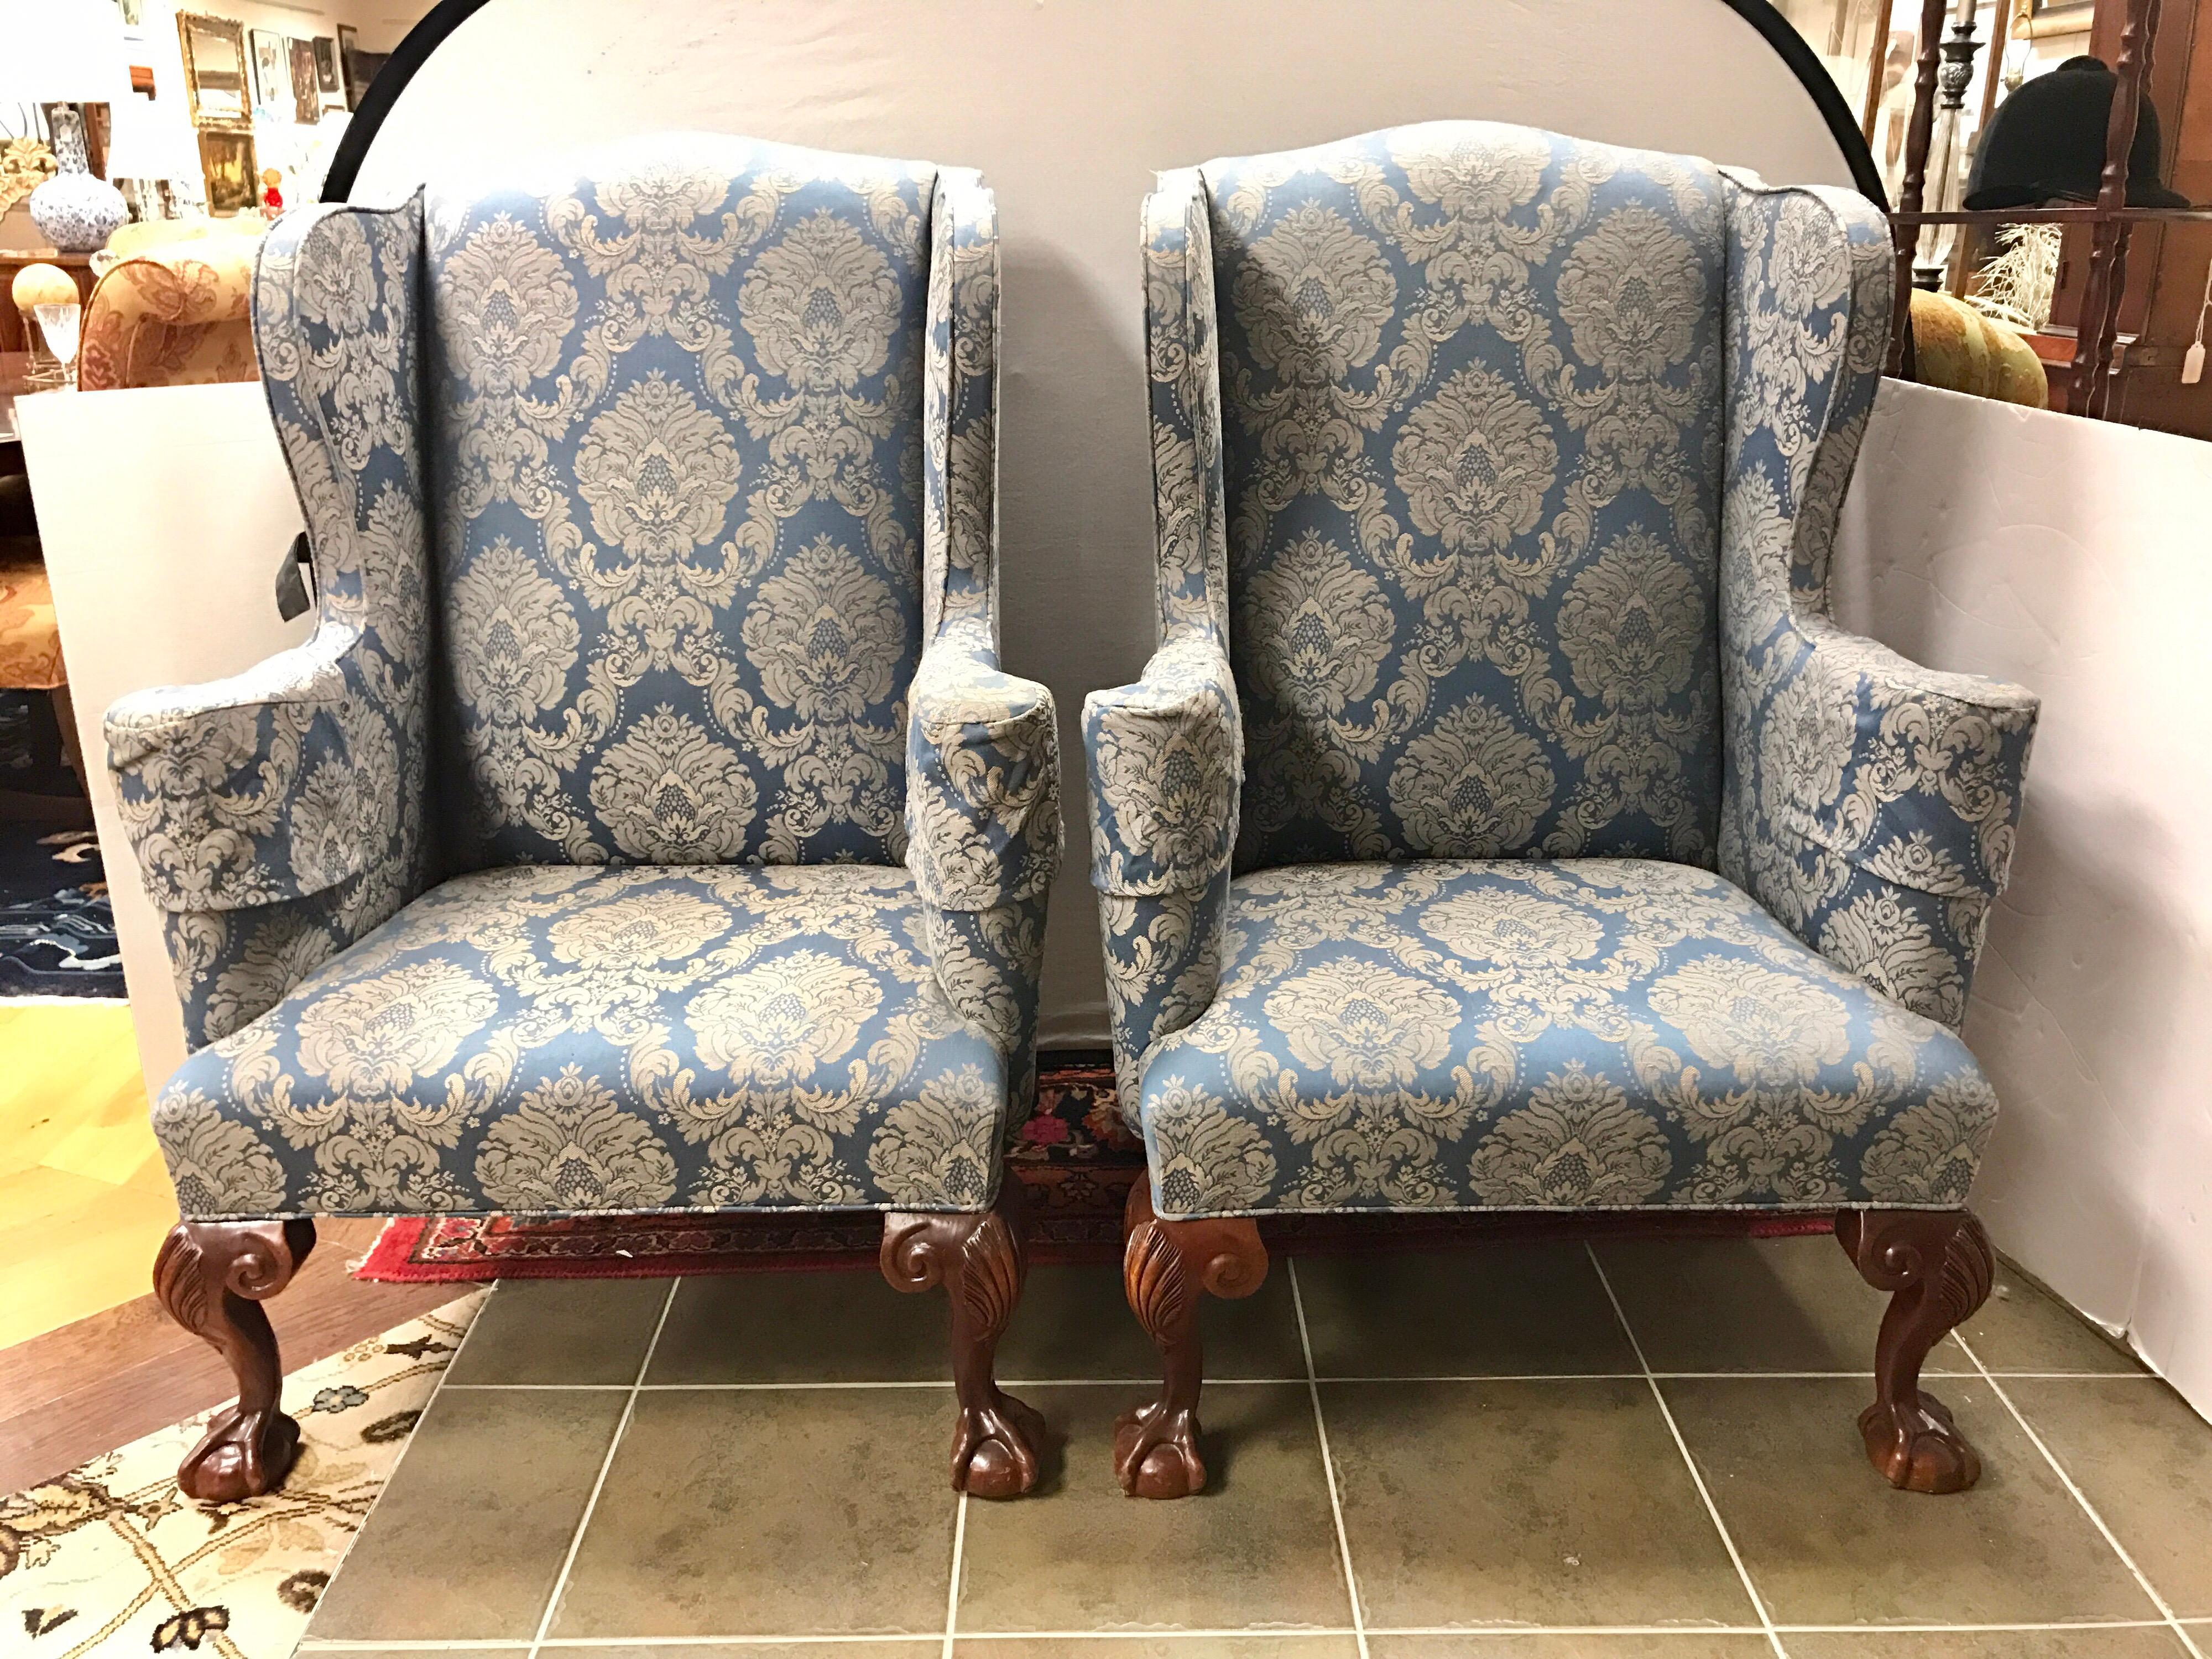 Magnificent pair of English mahogany wingbacks feature ball and claw feet in the front and back. They are upholstered in a luxurious blue damask fabric.  Would look great as fireplace chairs or as end chairs for a dining room table.
They are to die